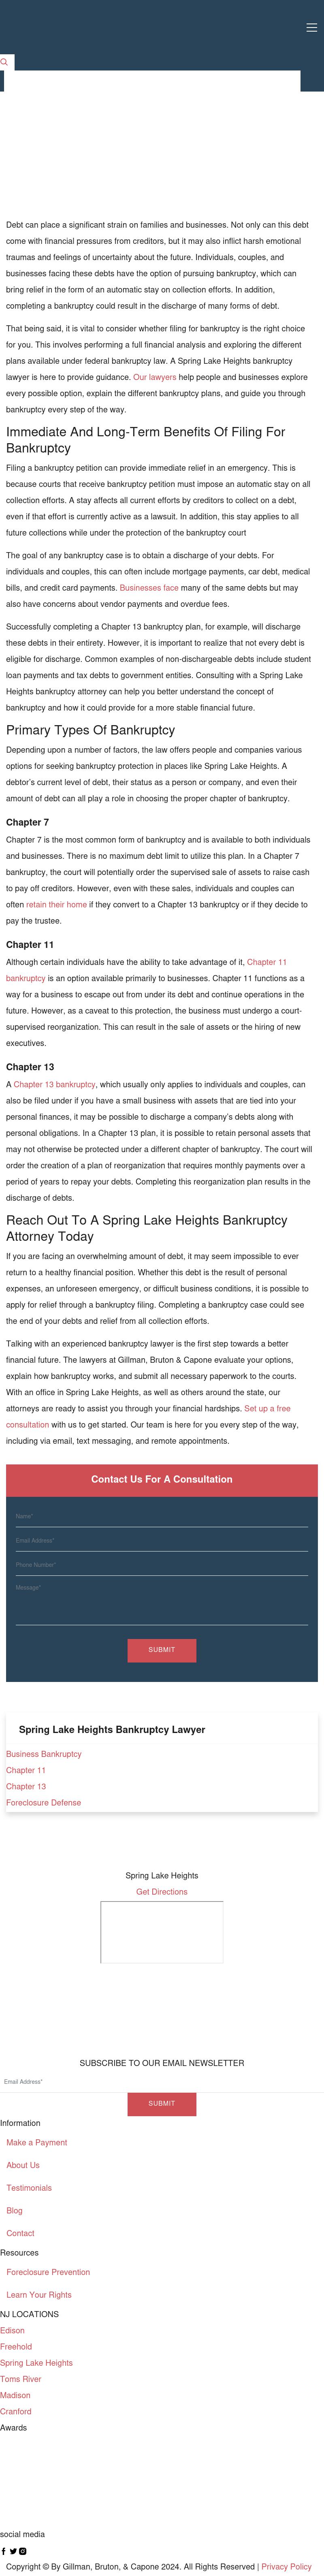 Gillman, Bruton, Capone Law Group - Spring Lake Heights NJ Lawyers